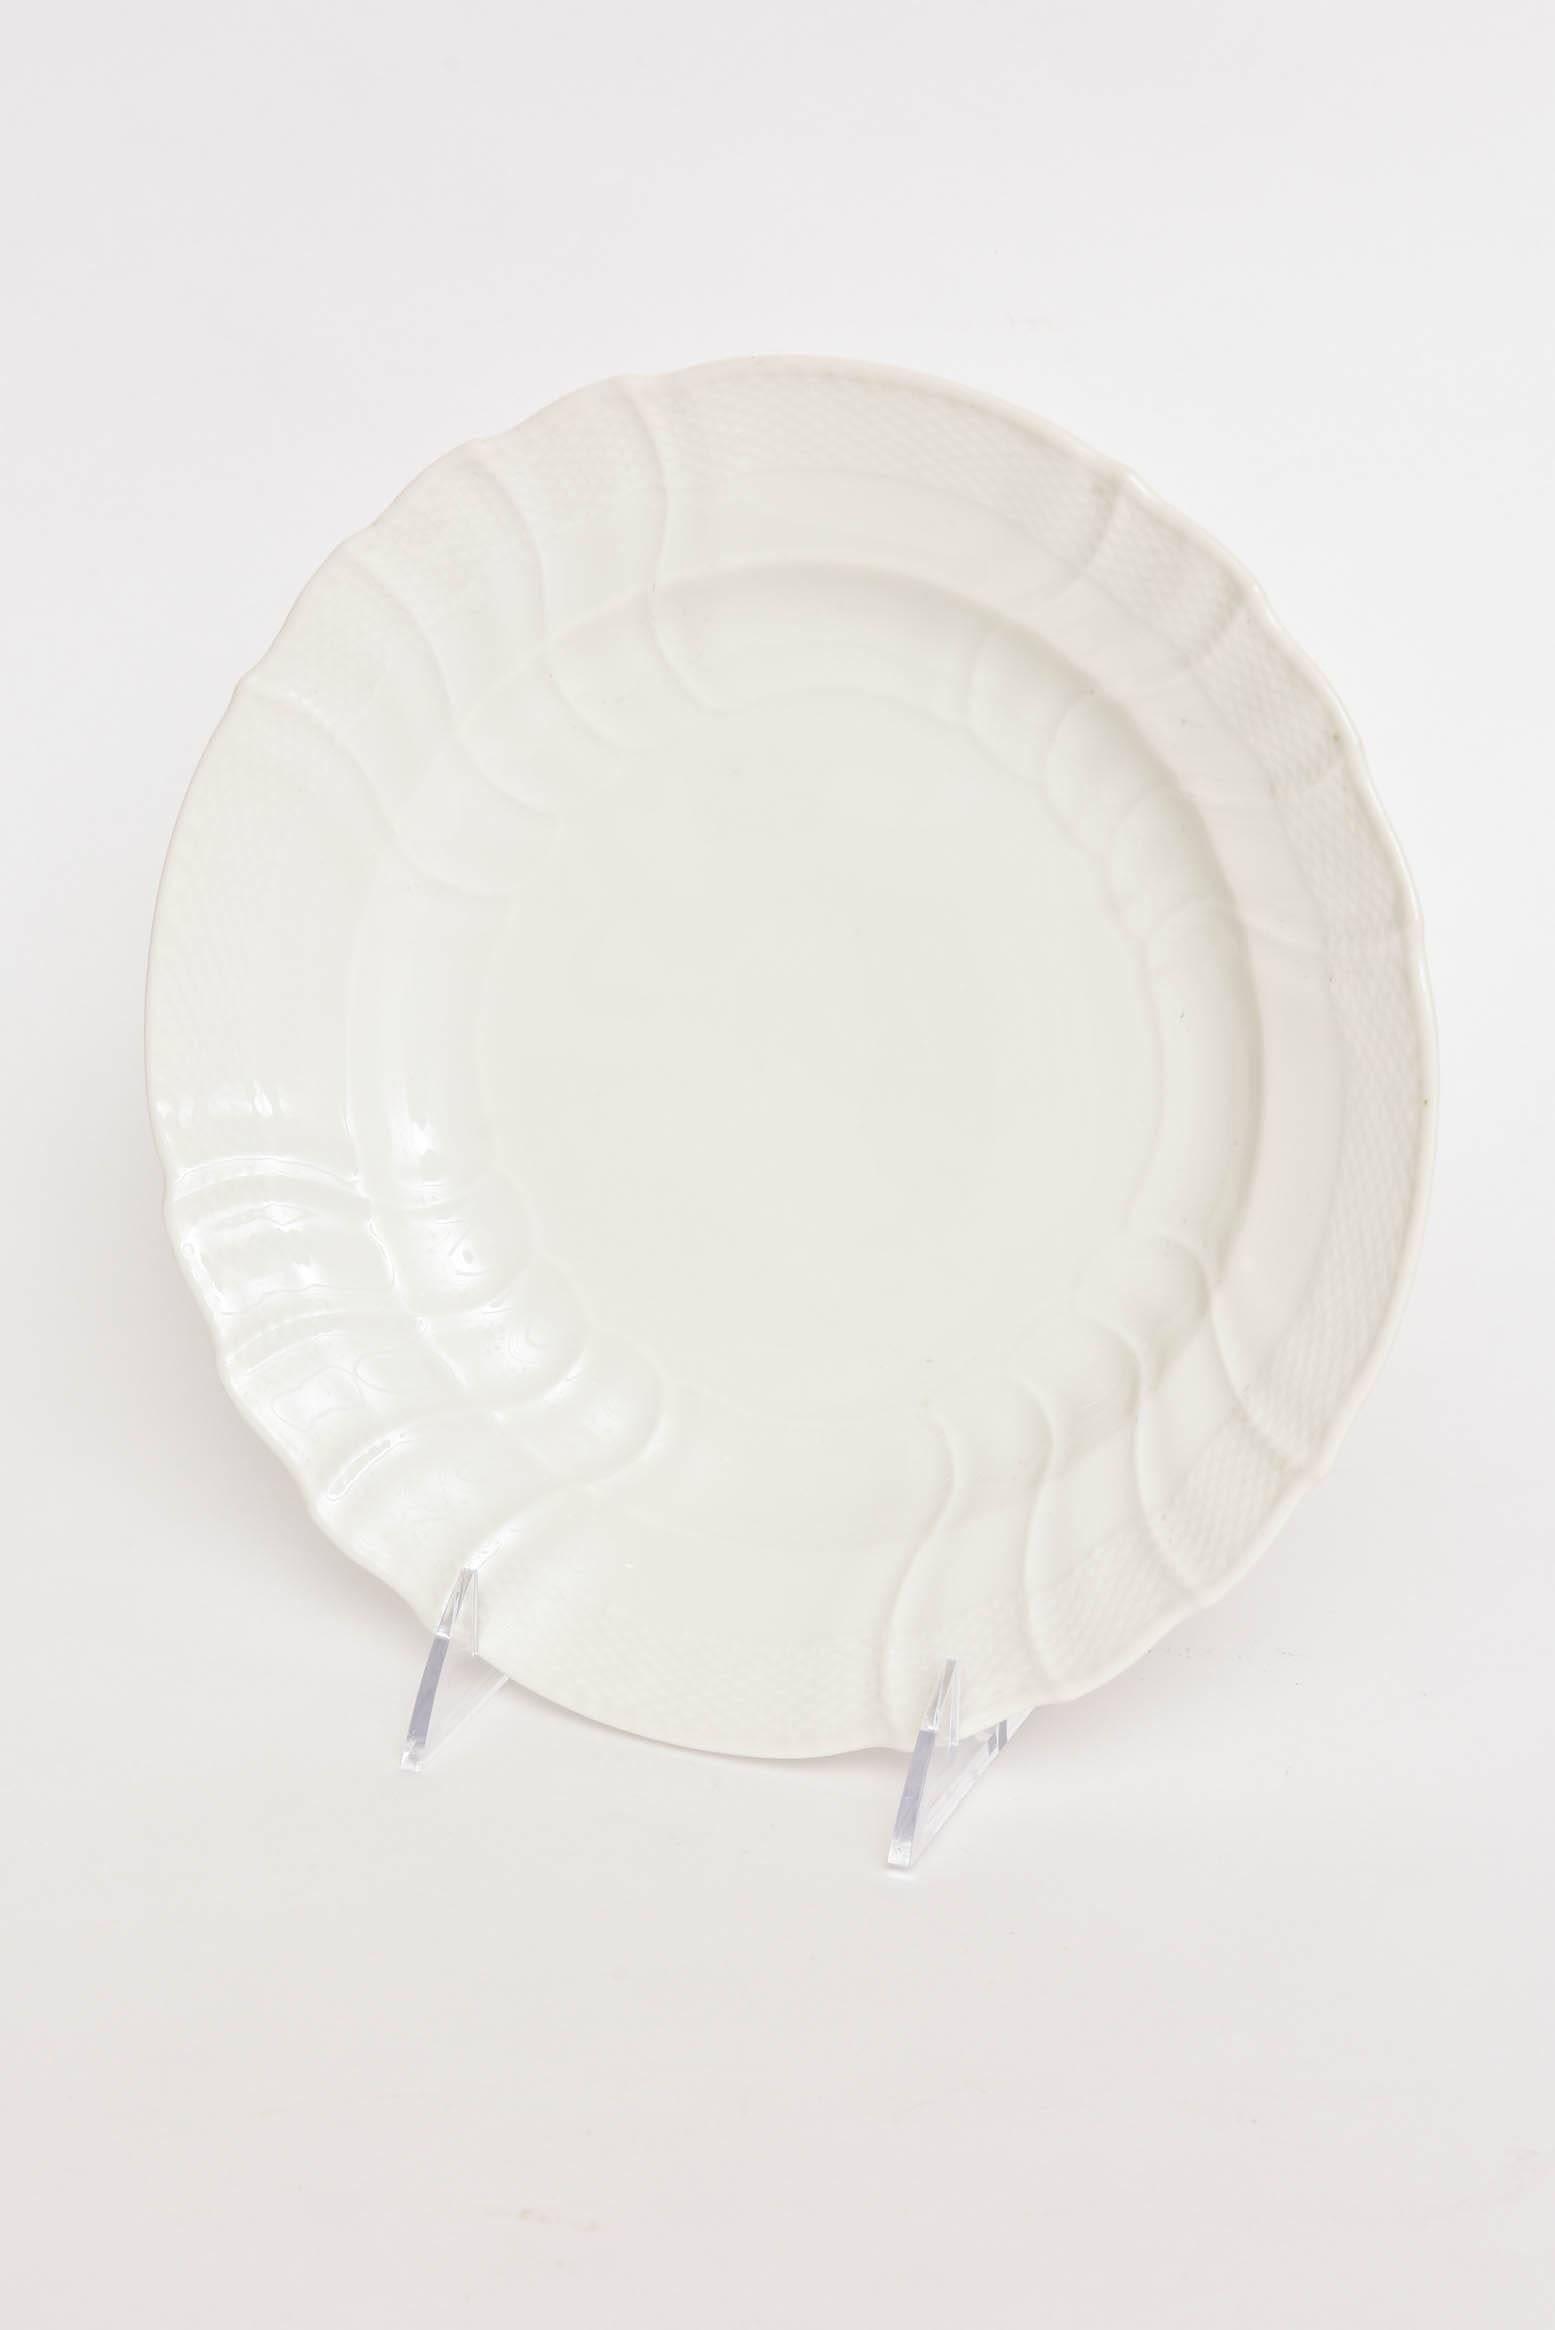 An elegant set of last quarter of the 19th century crisp all white dinner plates. Their Classic design which they still produce today, and is the base for all their wonderful hand-painted designs. These are in super nice antique condition and will